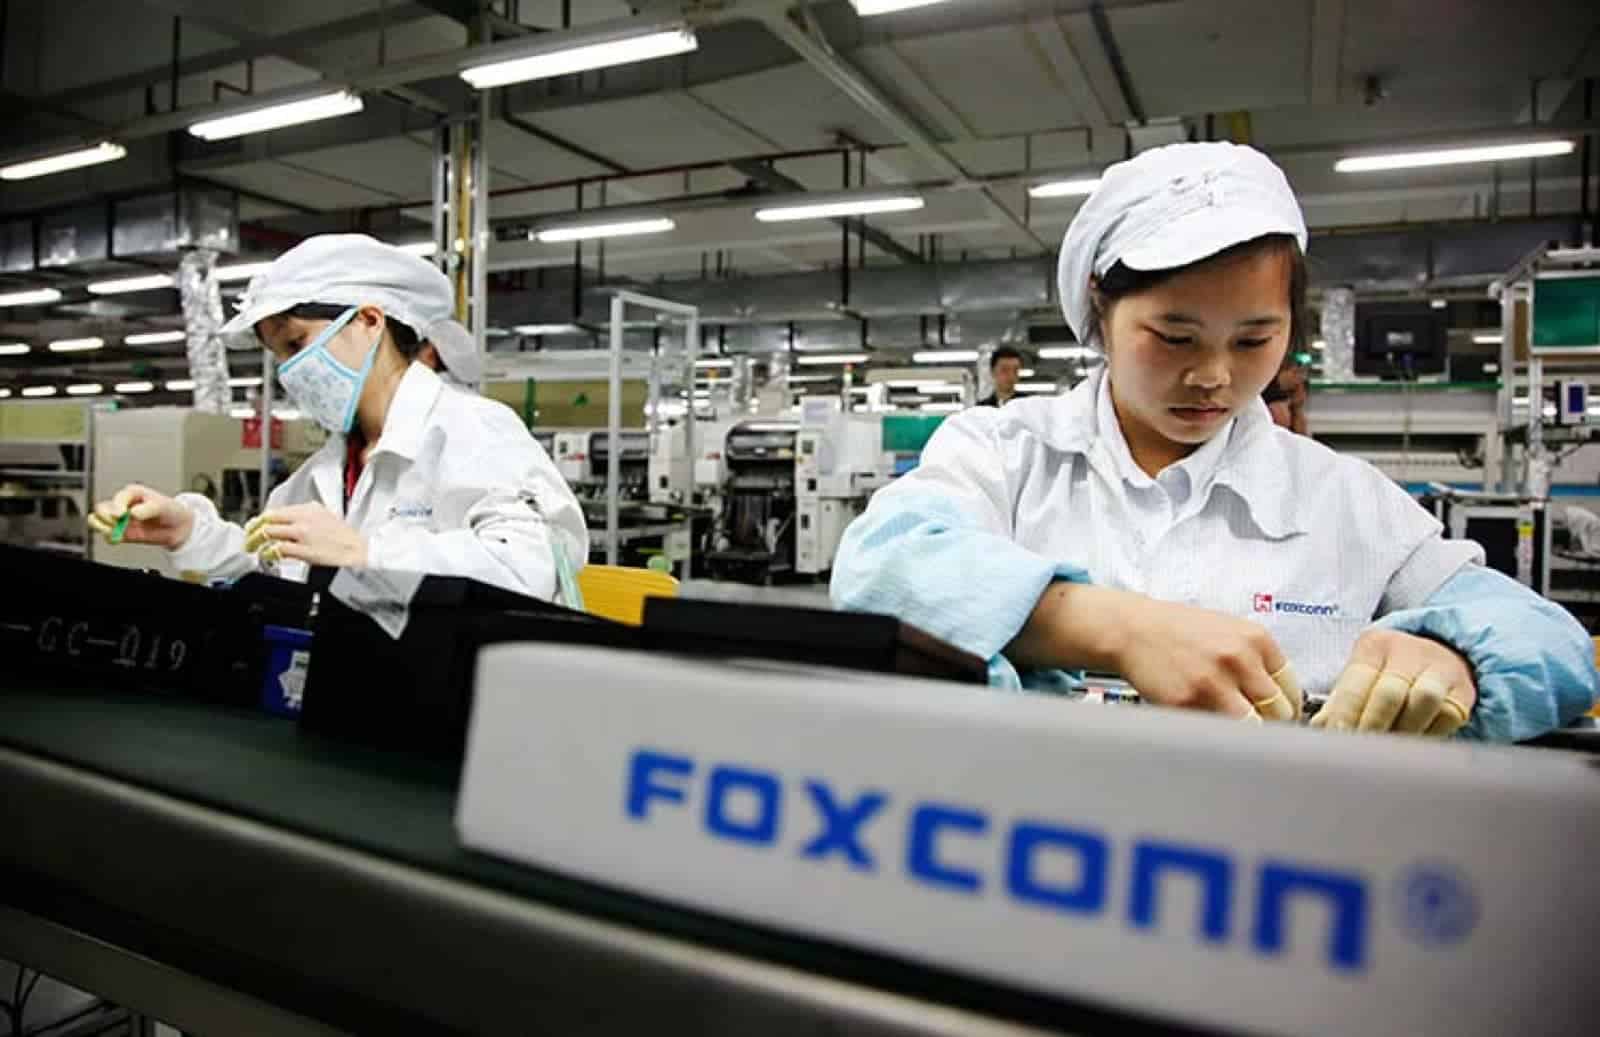 Workers in Apple manufacturing plants built iPhones.